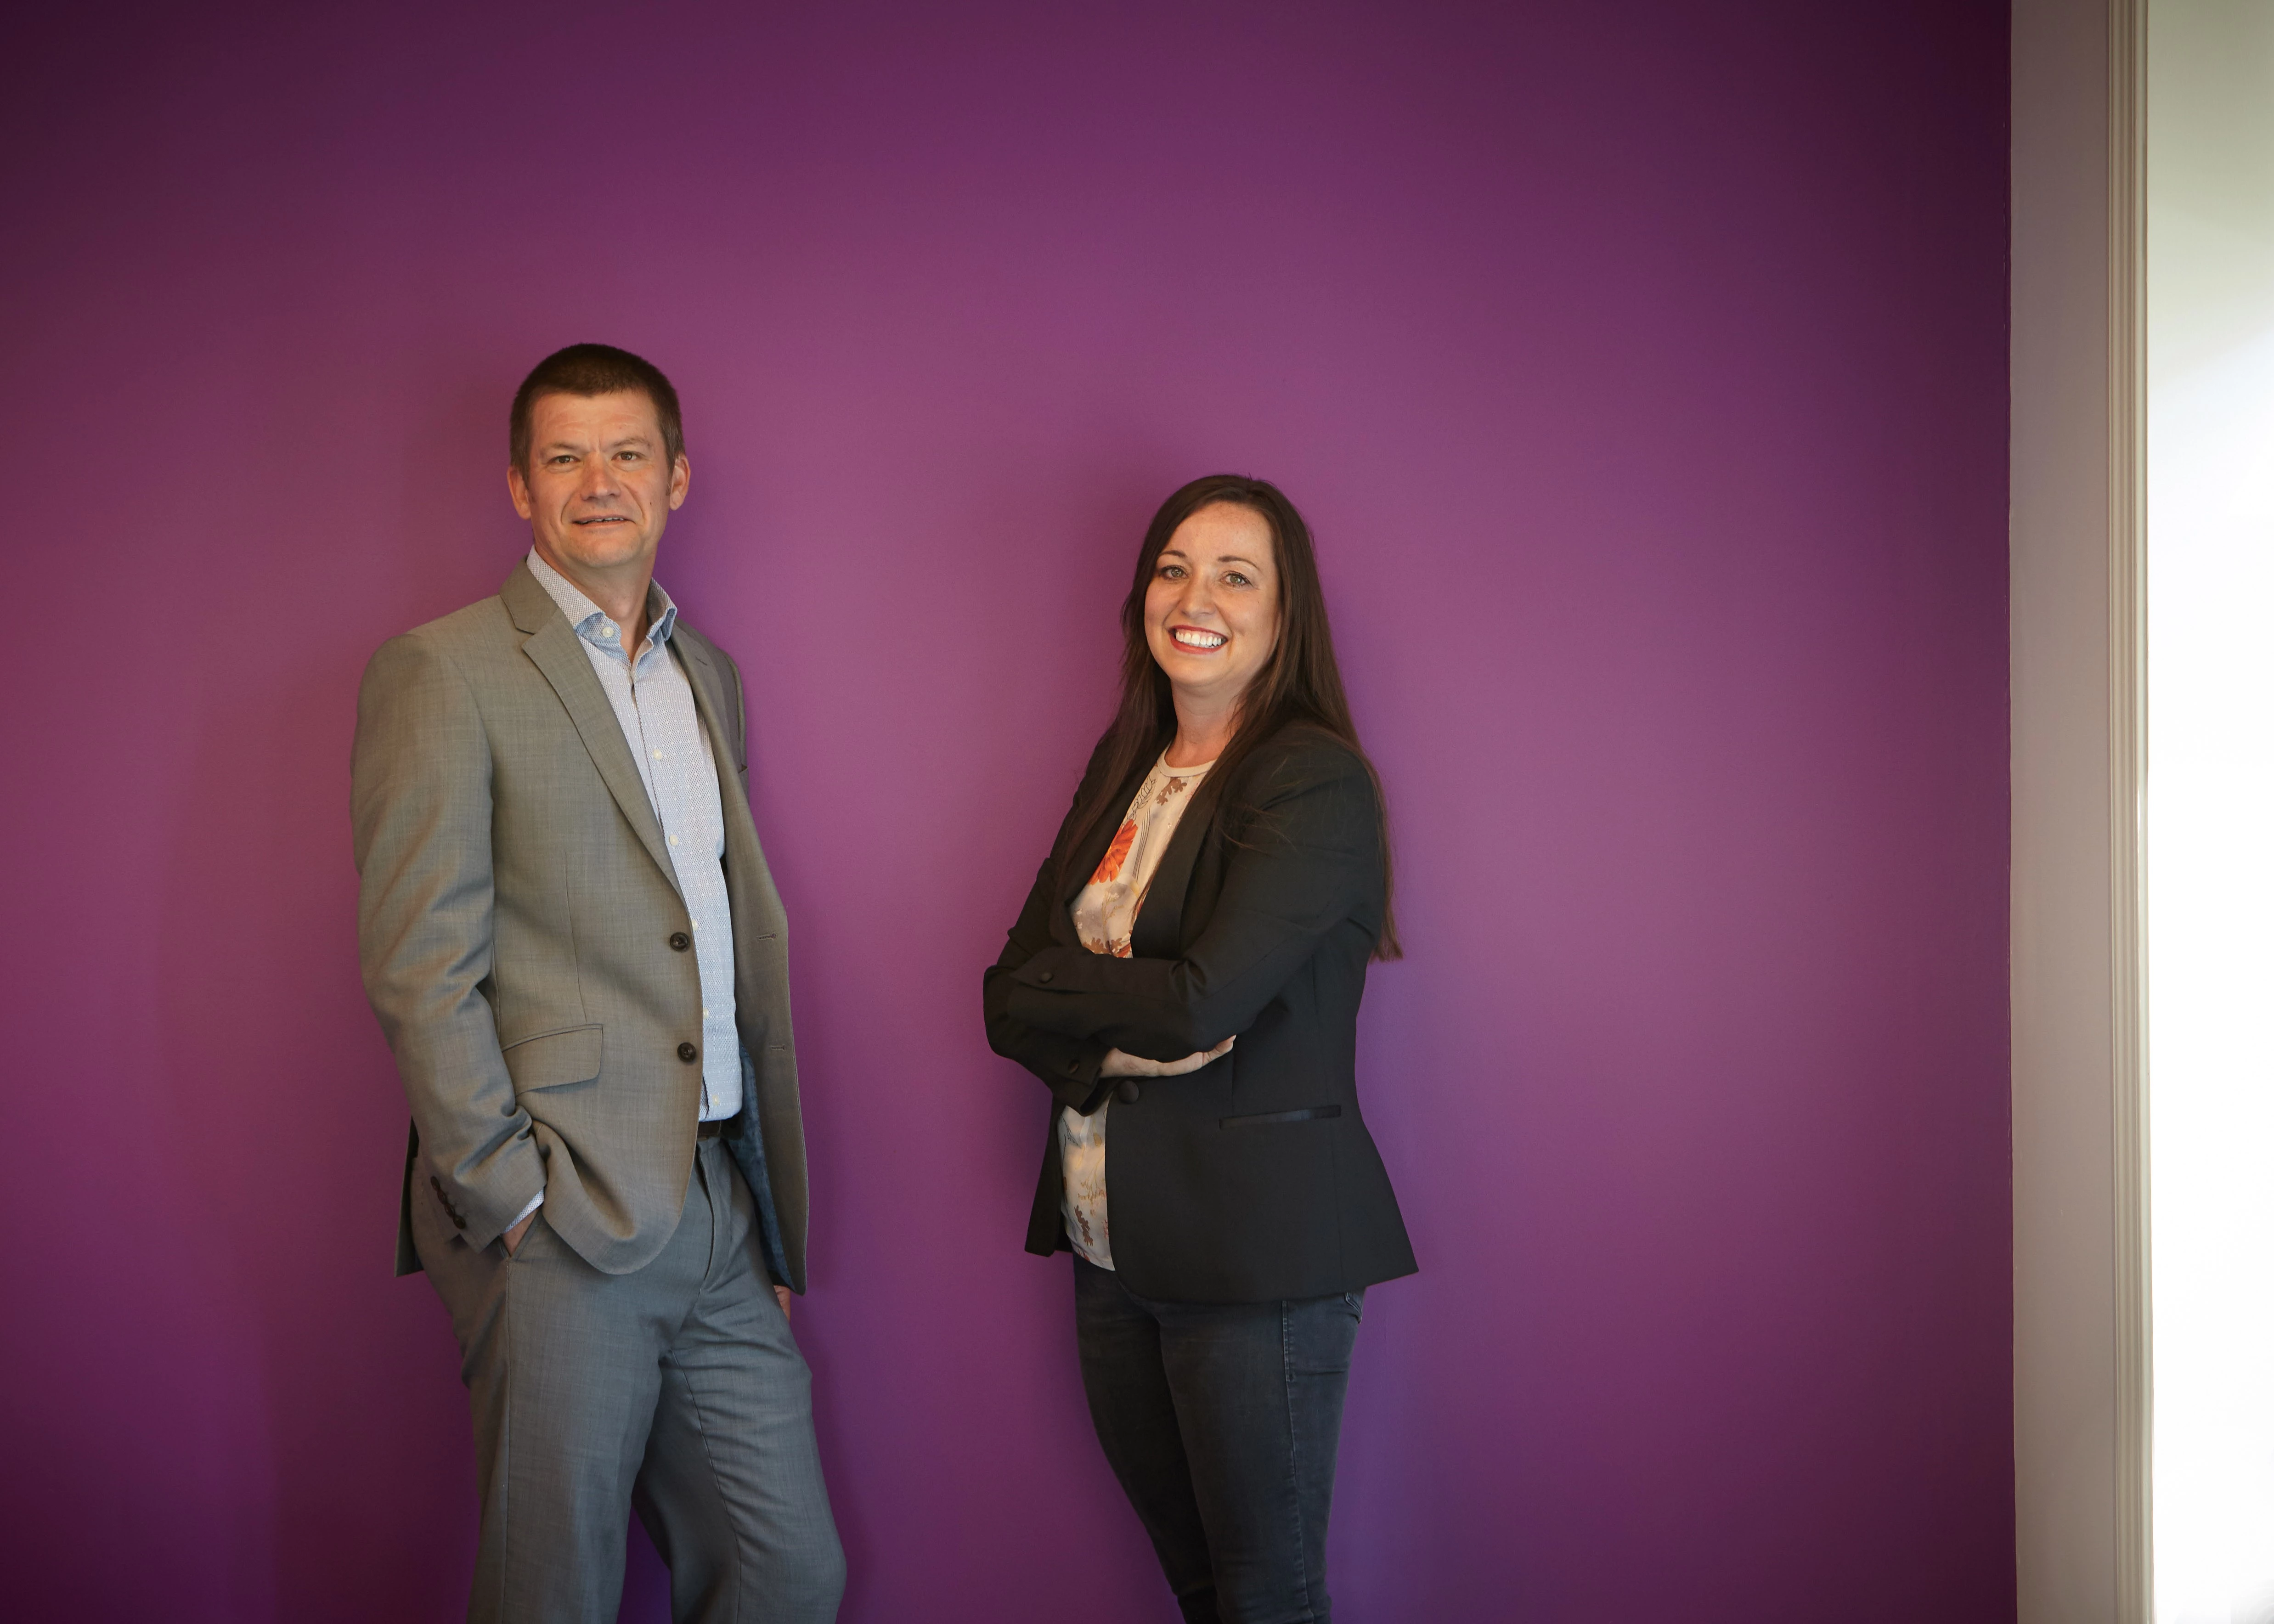 Martin Bown and Sara Crowther of My Accountant Management